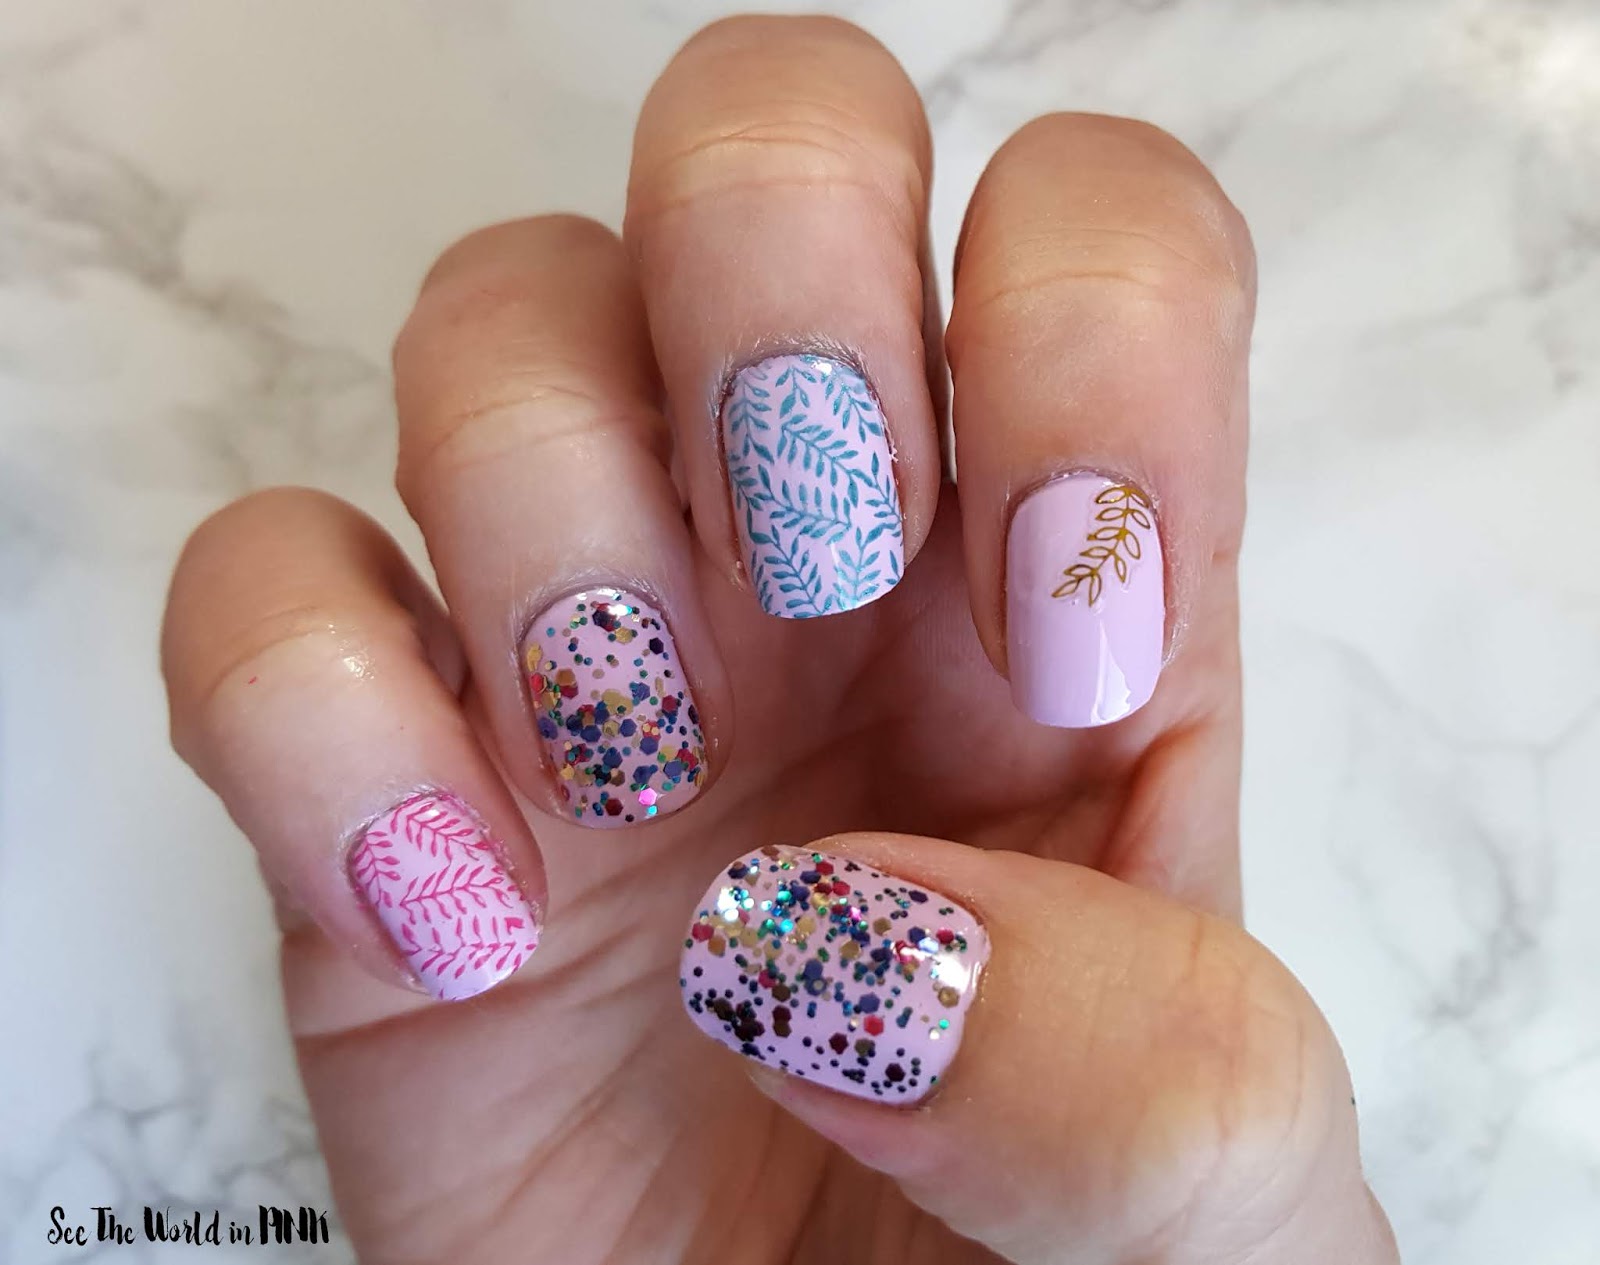 Manicure Monday - New Sephora Collection Color Hit Mini Nail Polishes + Leaves Nail Art 